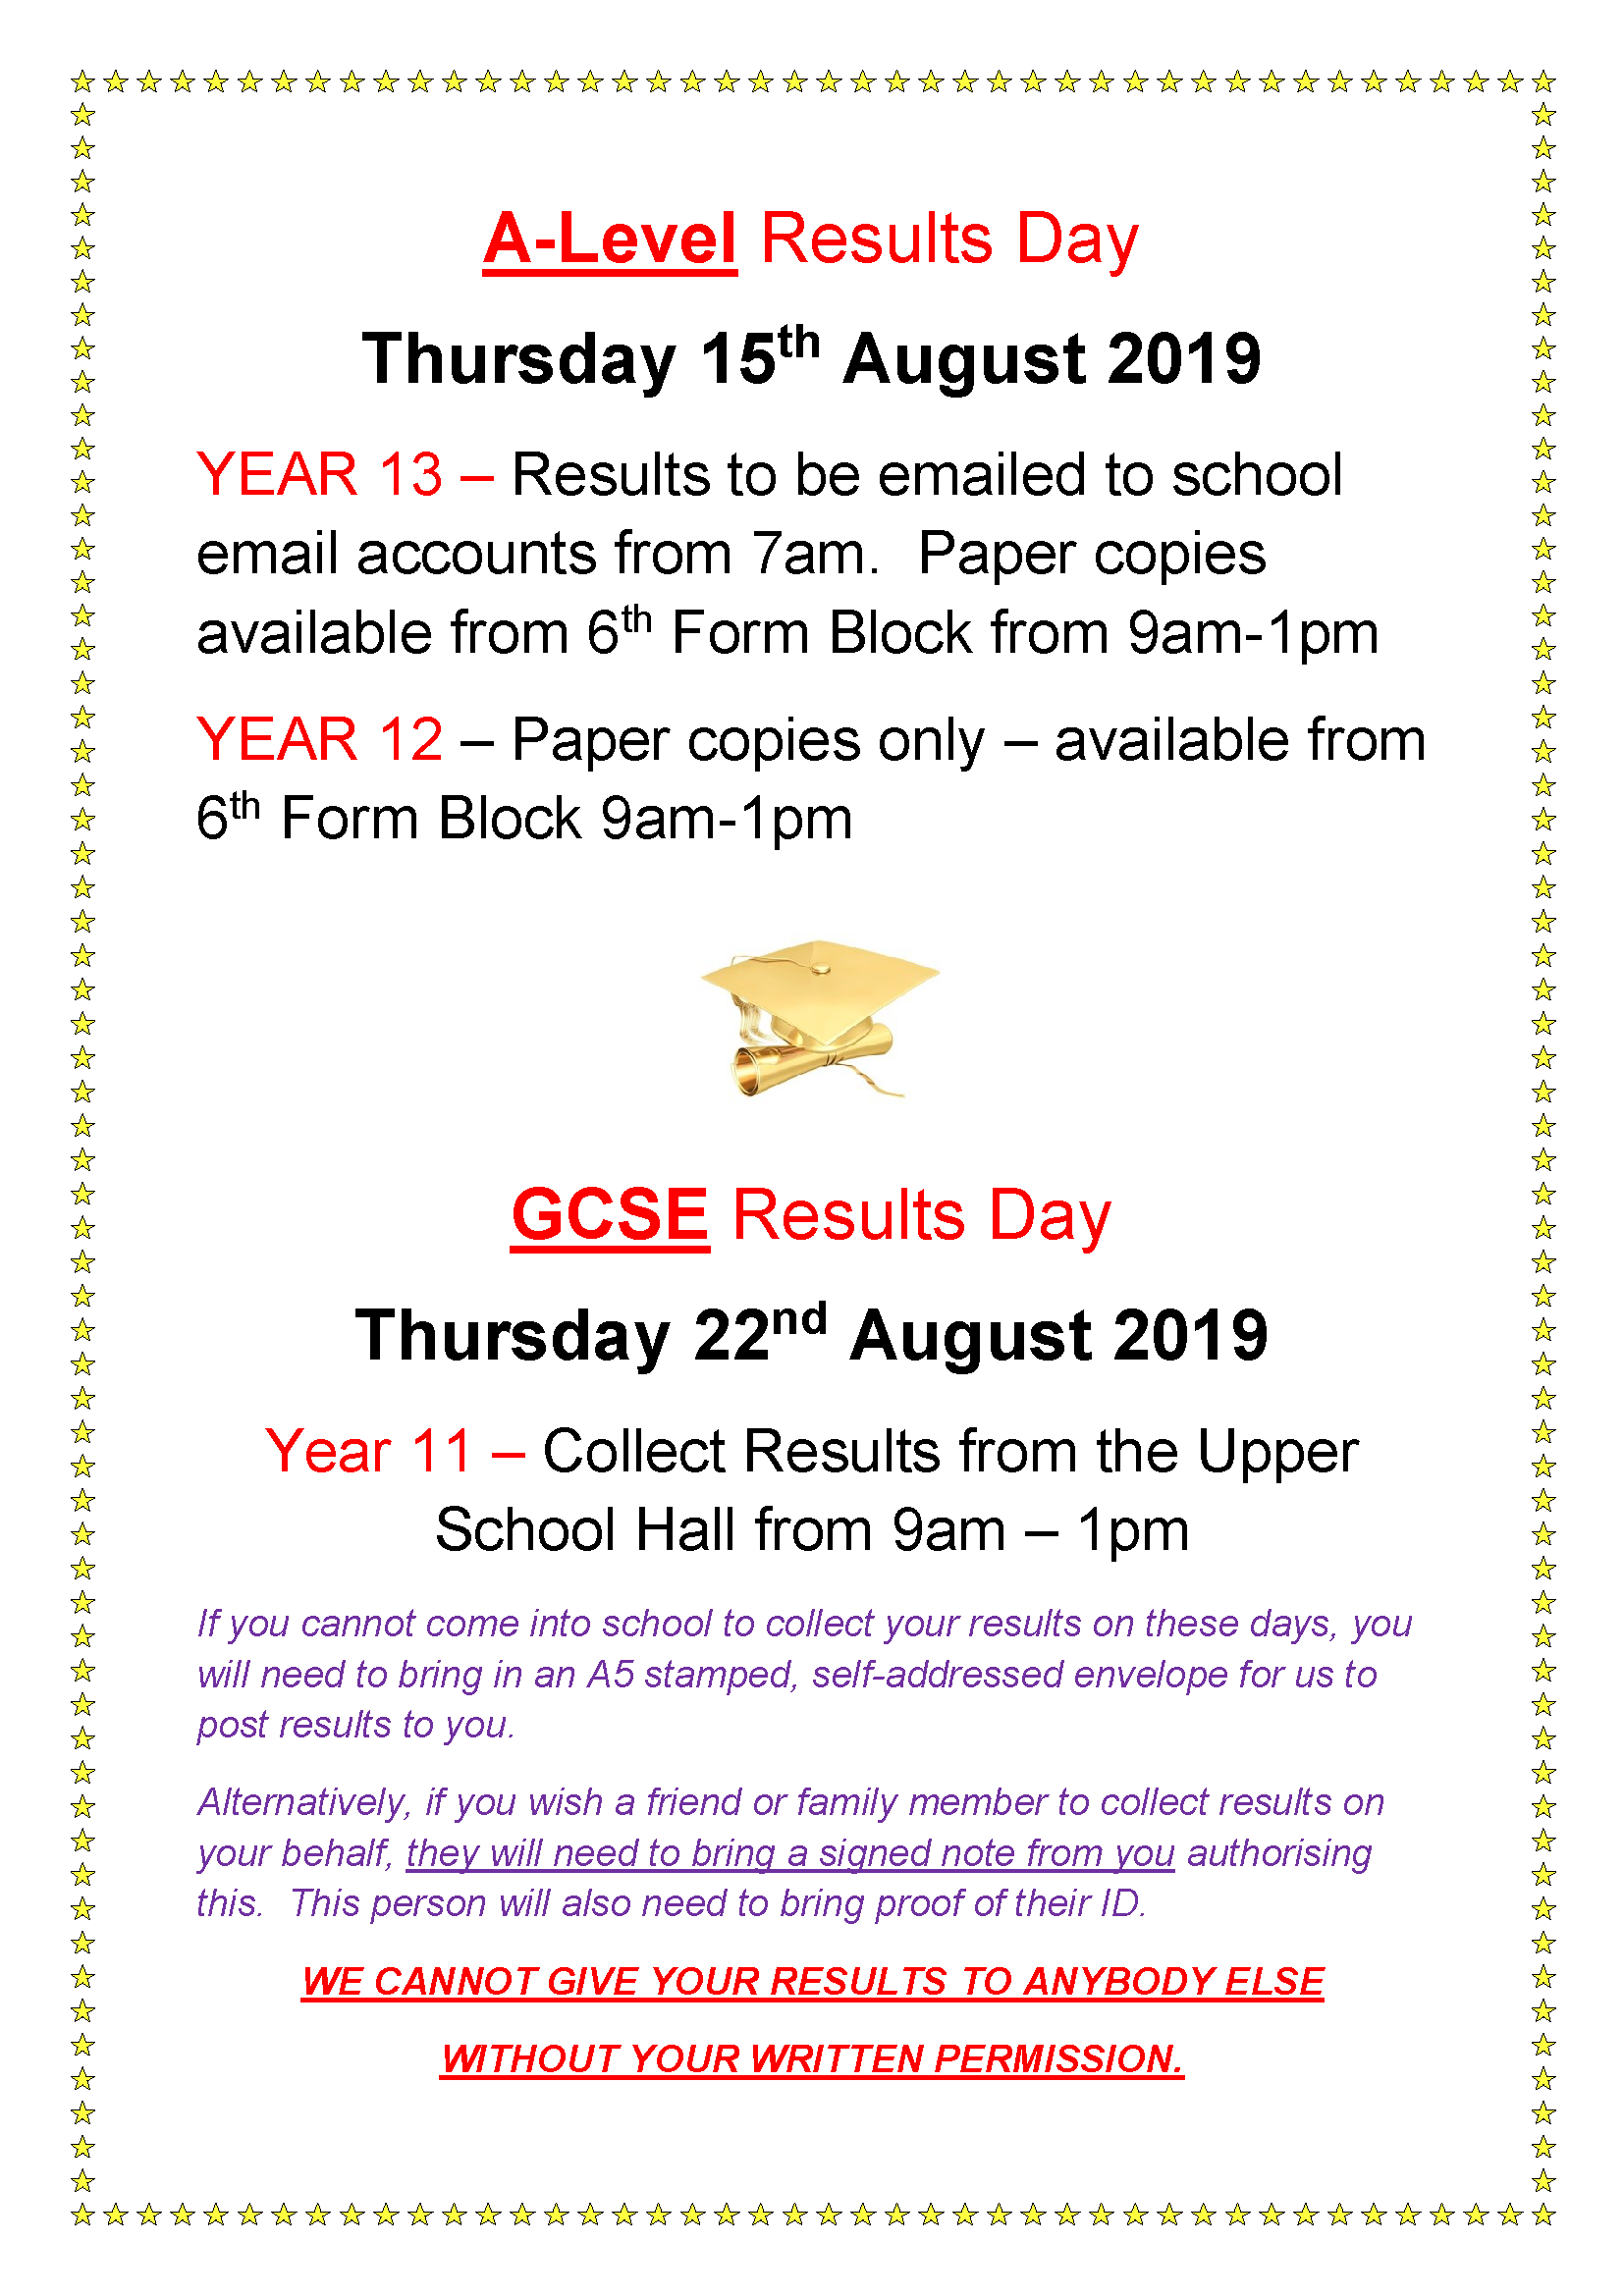 results day information poster 2019